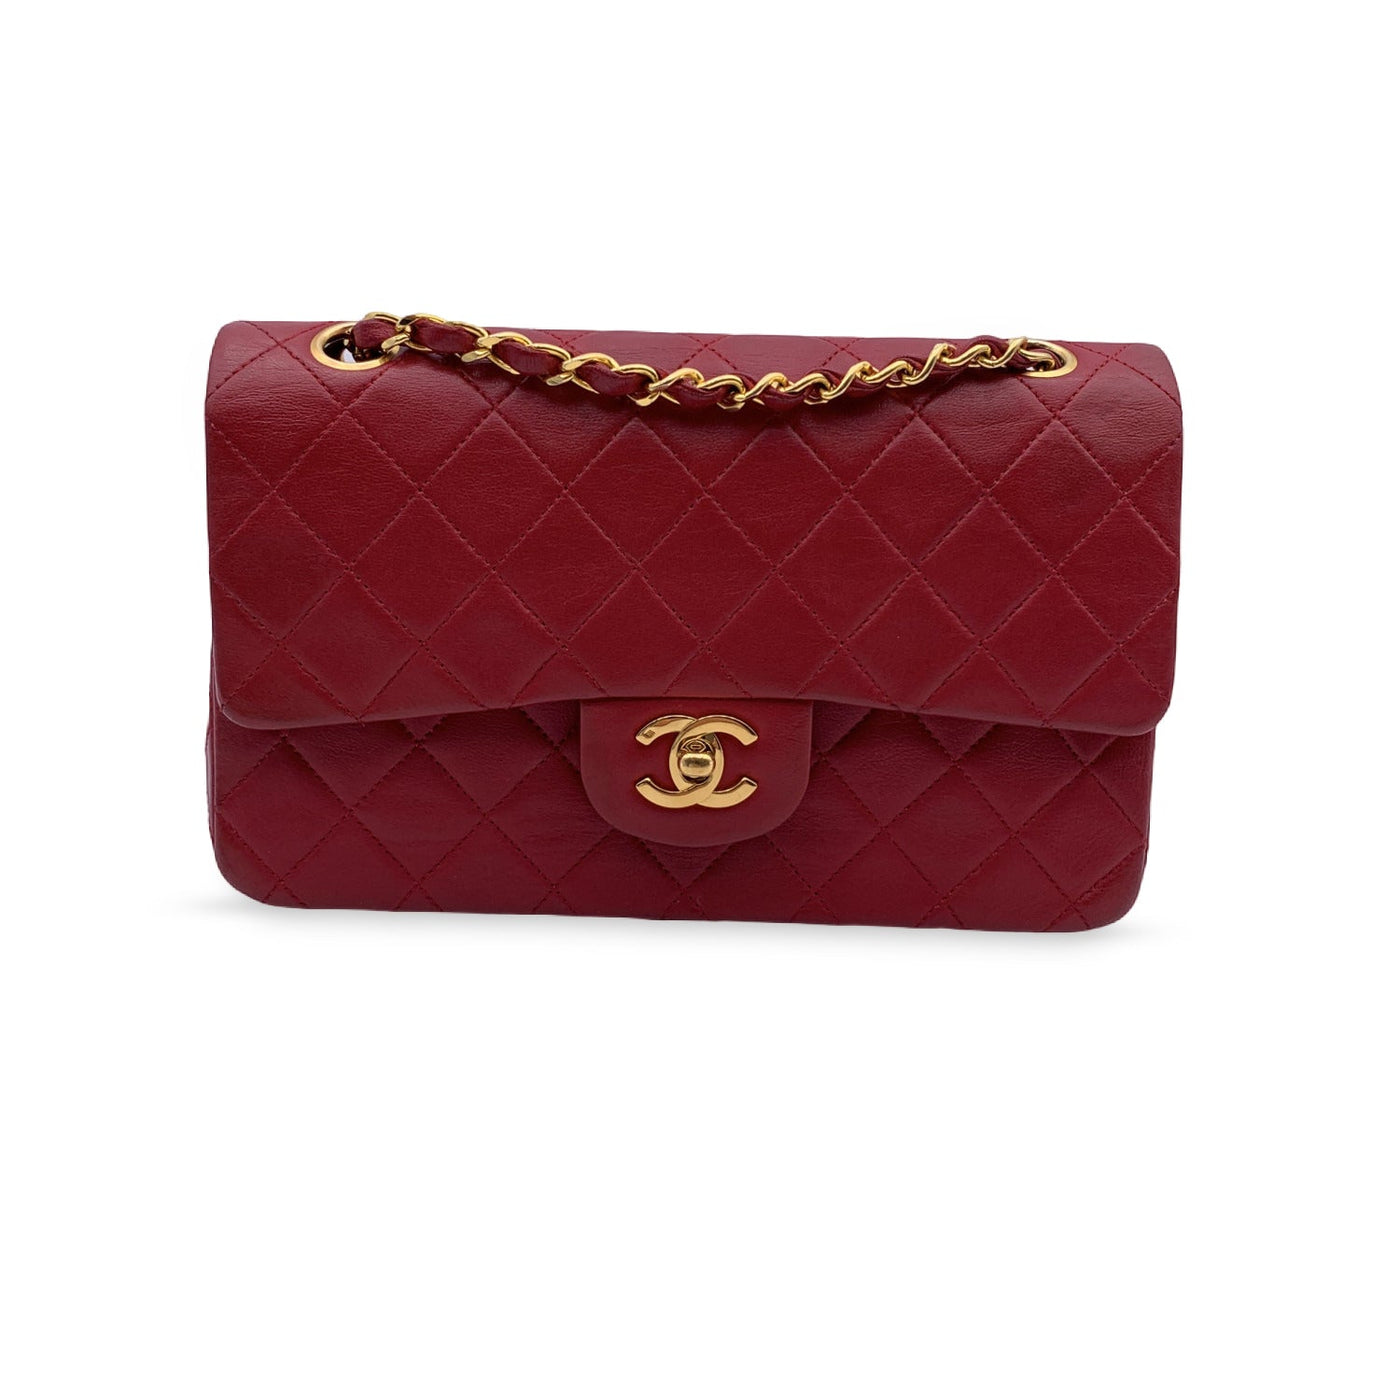 Chanel Vintage Red Quilted Timeless Classic Small 2.55 Bag 23 cm